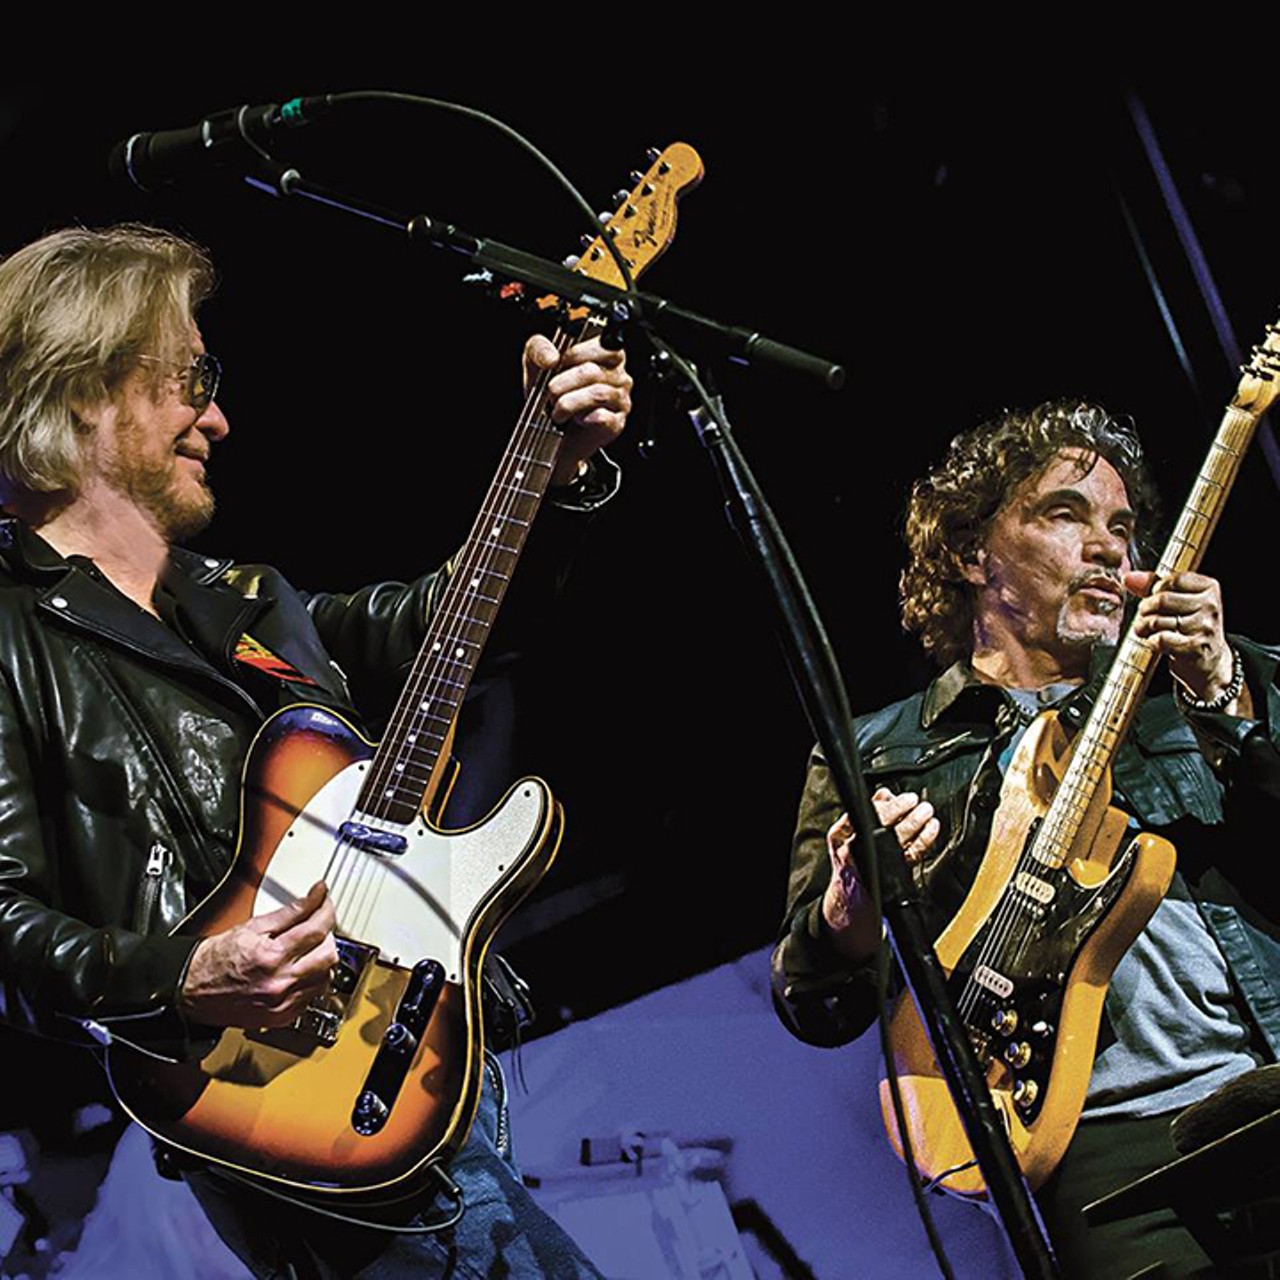 Tuesday, June 26Hall & Oates at Amway Center